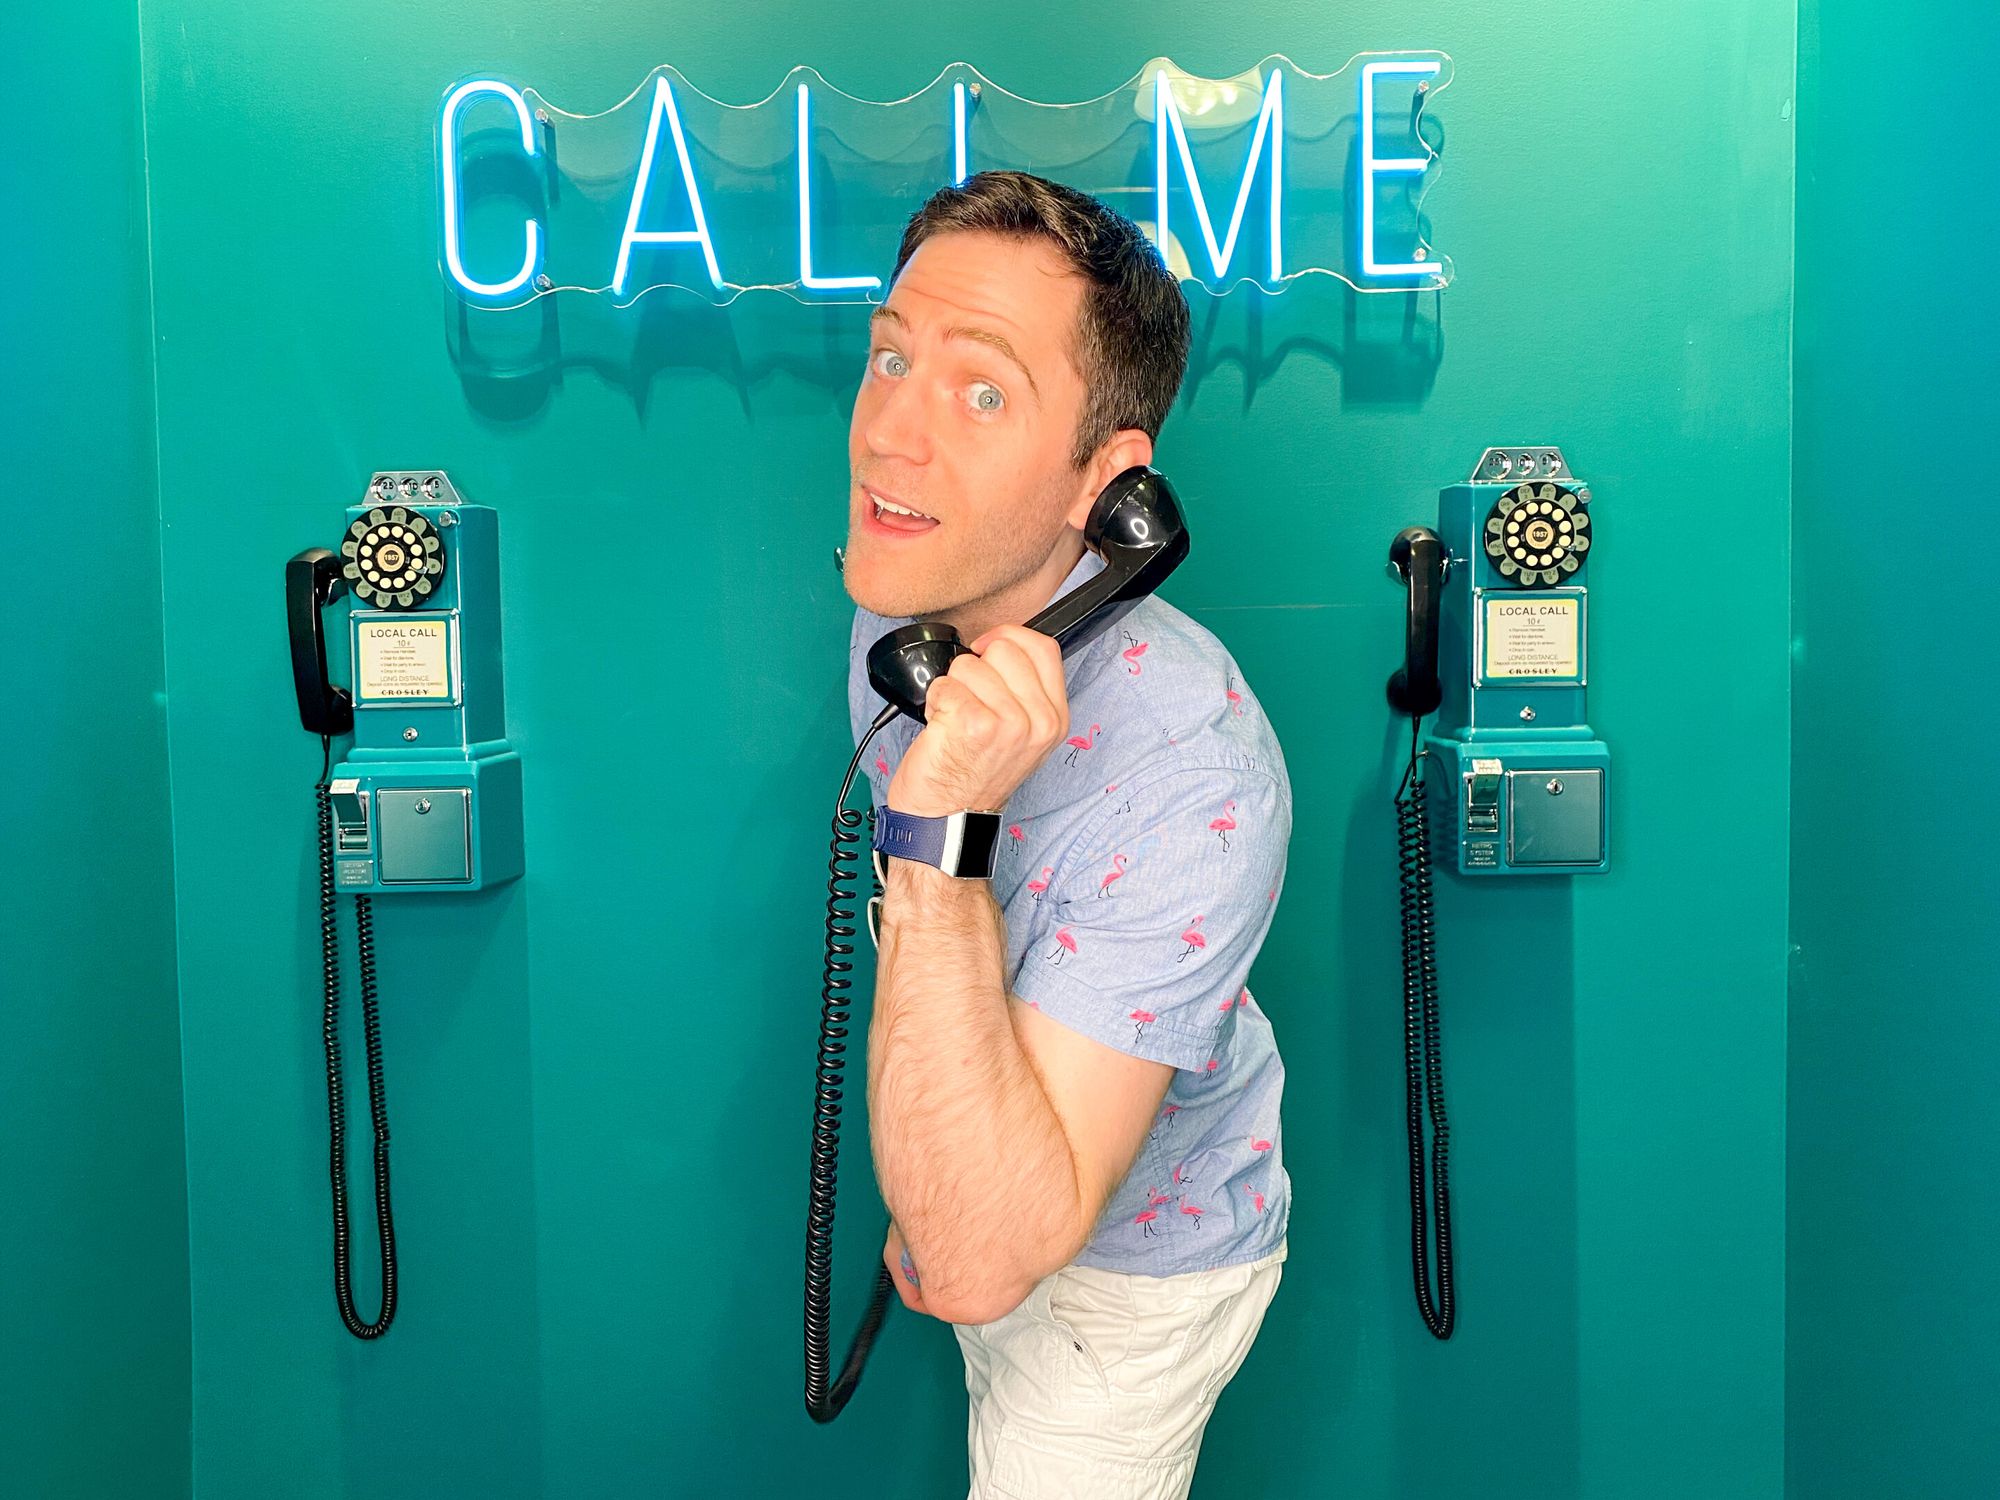 Ryan in front of three old school telephones with a receiver in his hand and leaning toward the camera.